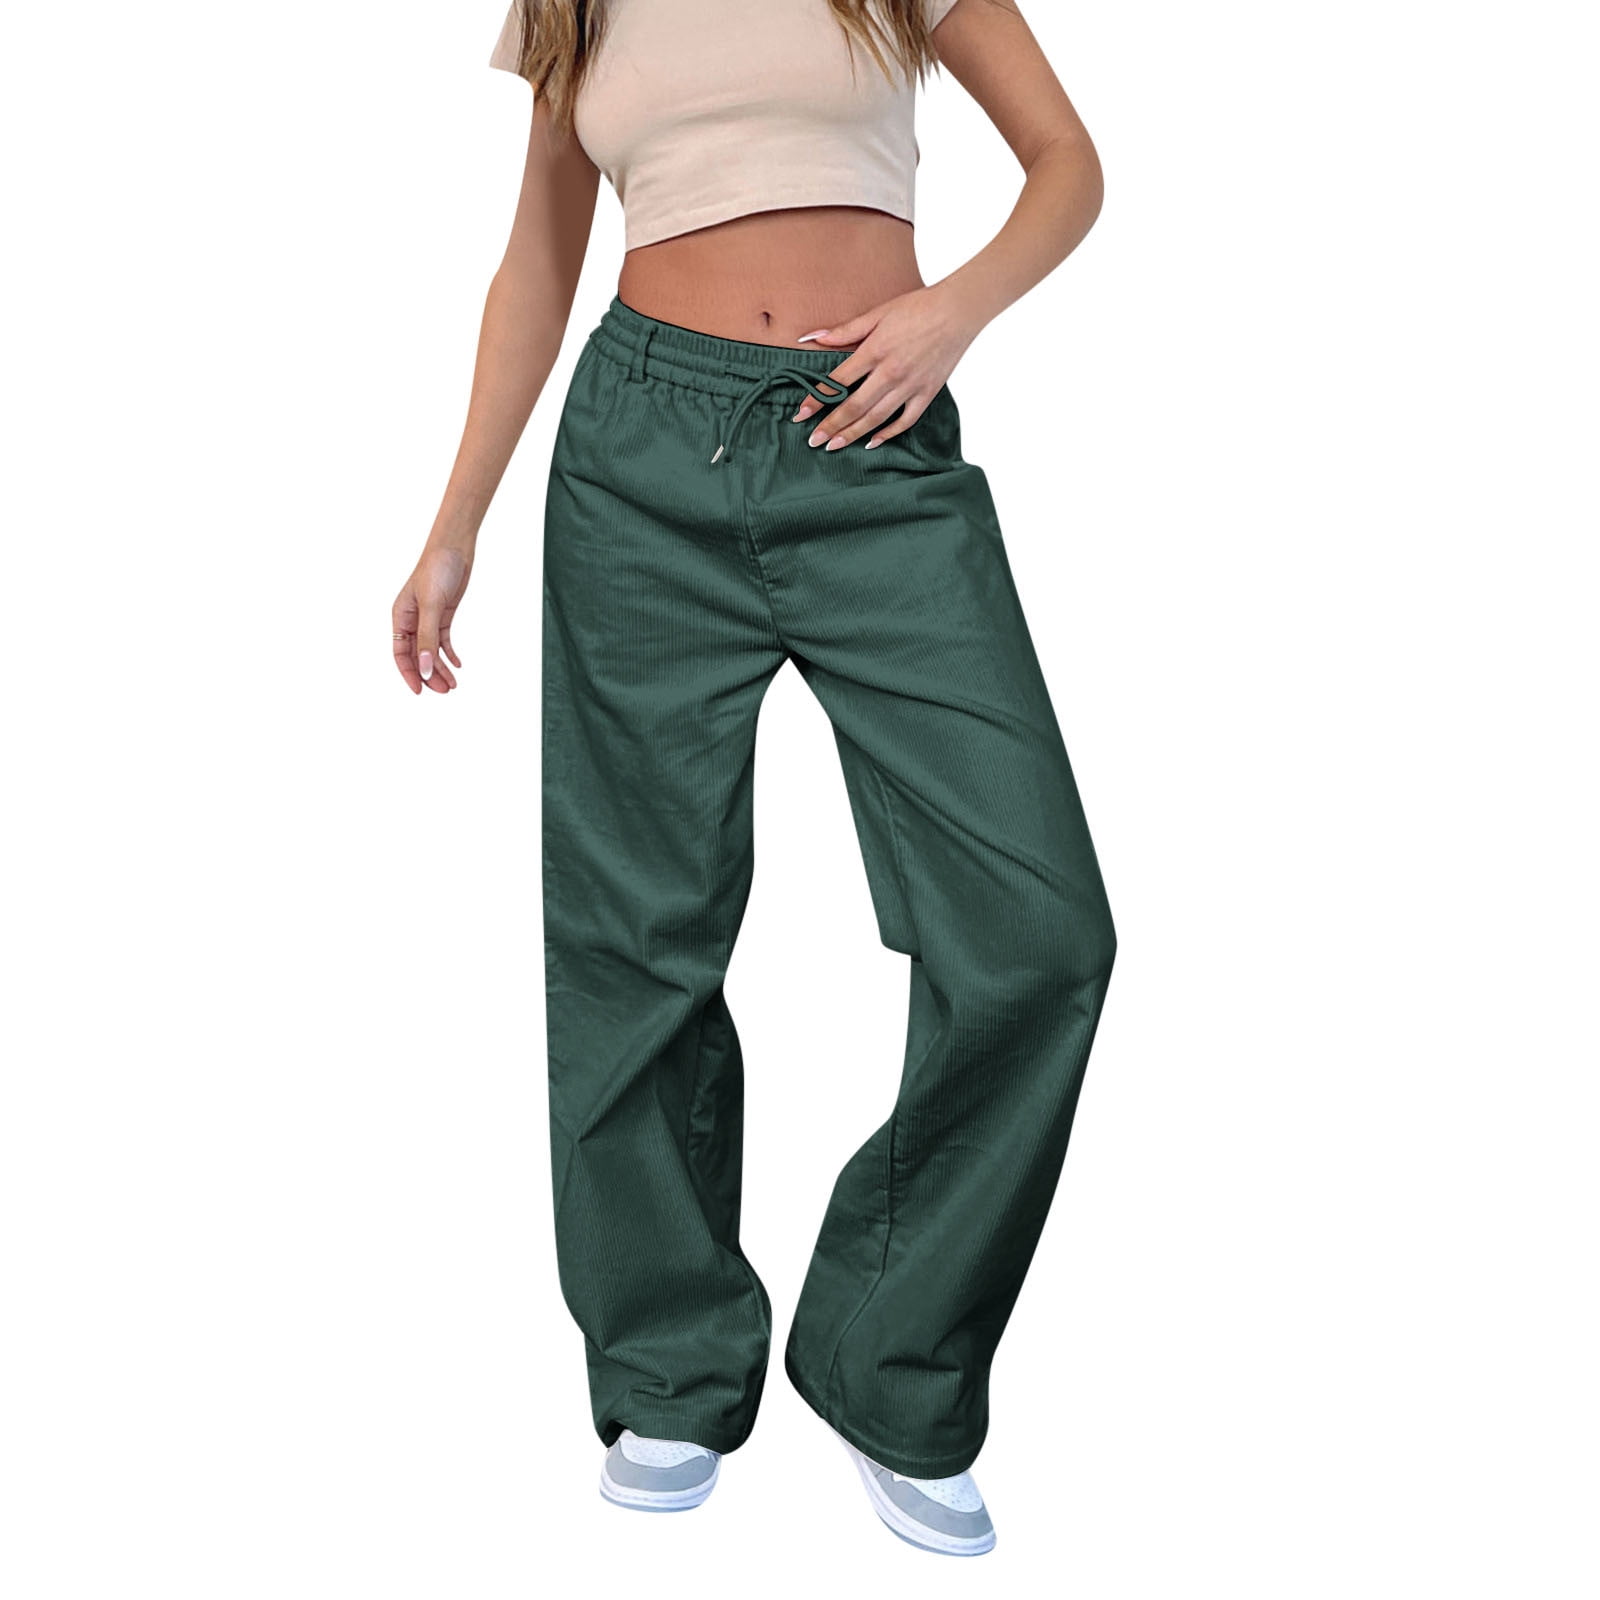 Premium Rayon Knotted Pant for Women, Both Side Pocket Casual Wear